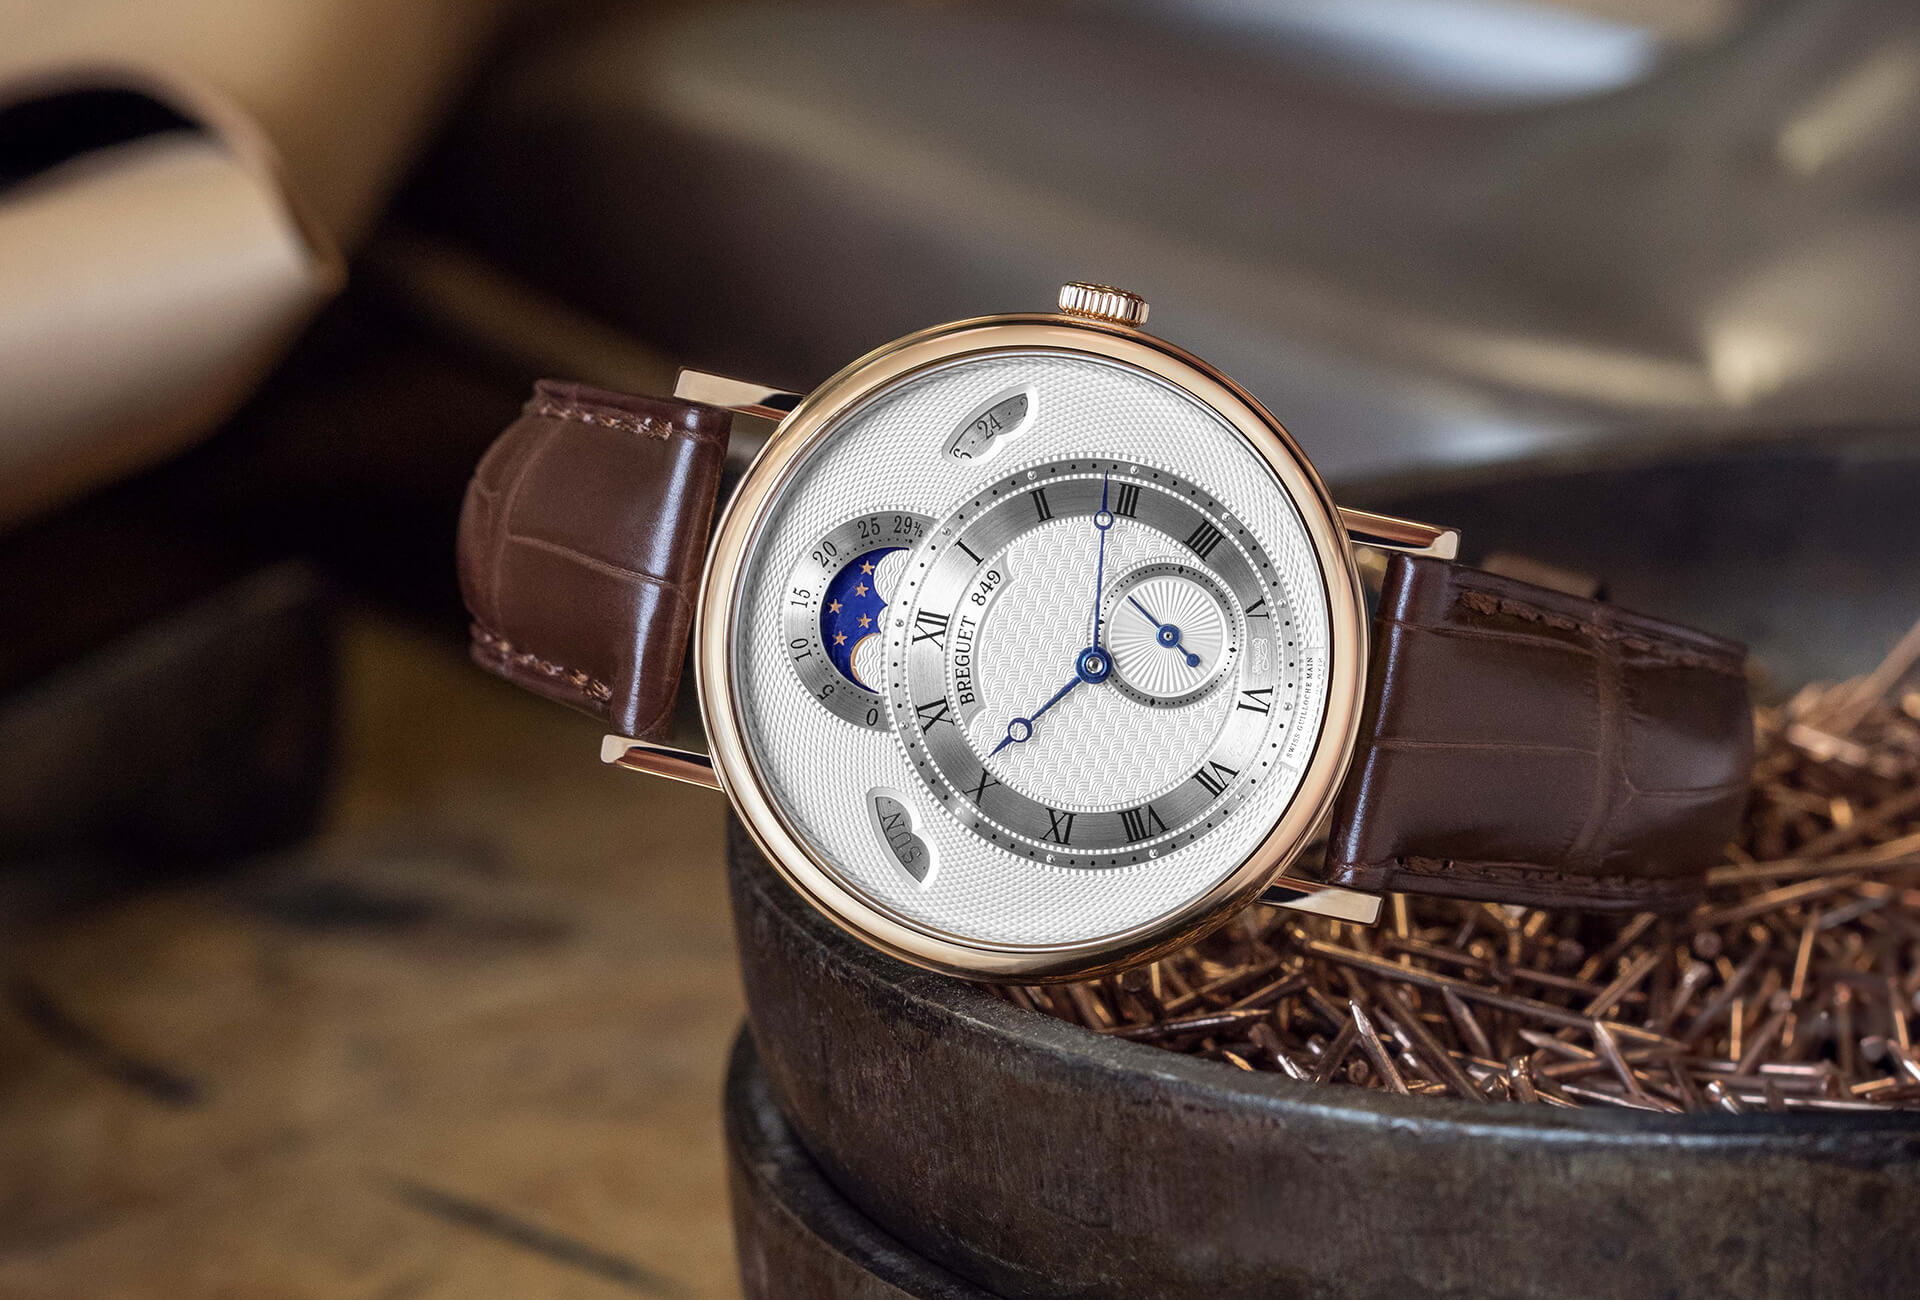 Breguet “goes home” to Paris – FHH Journal